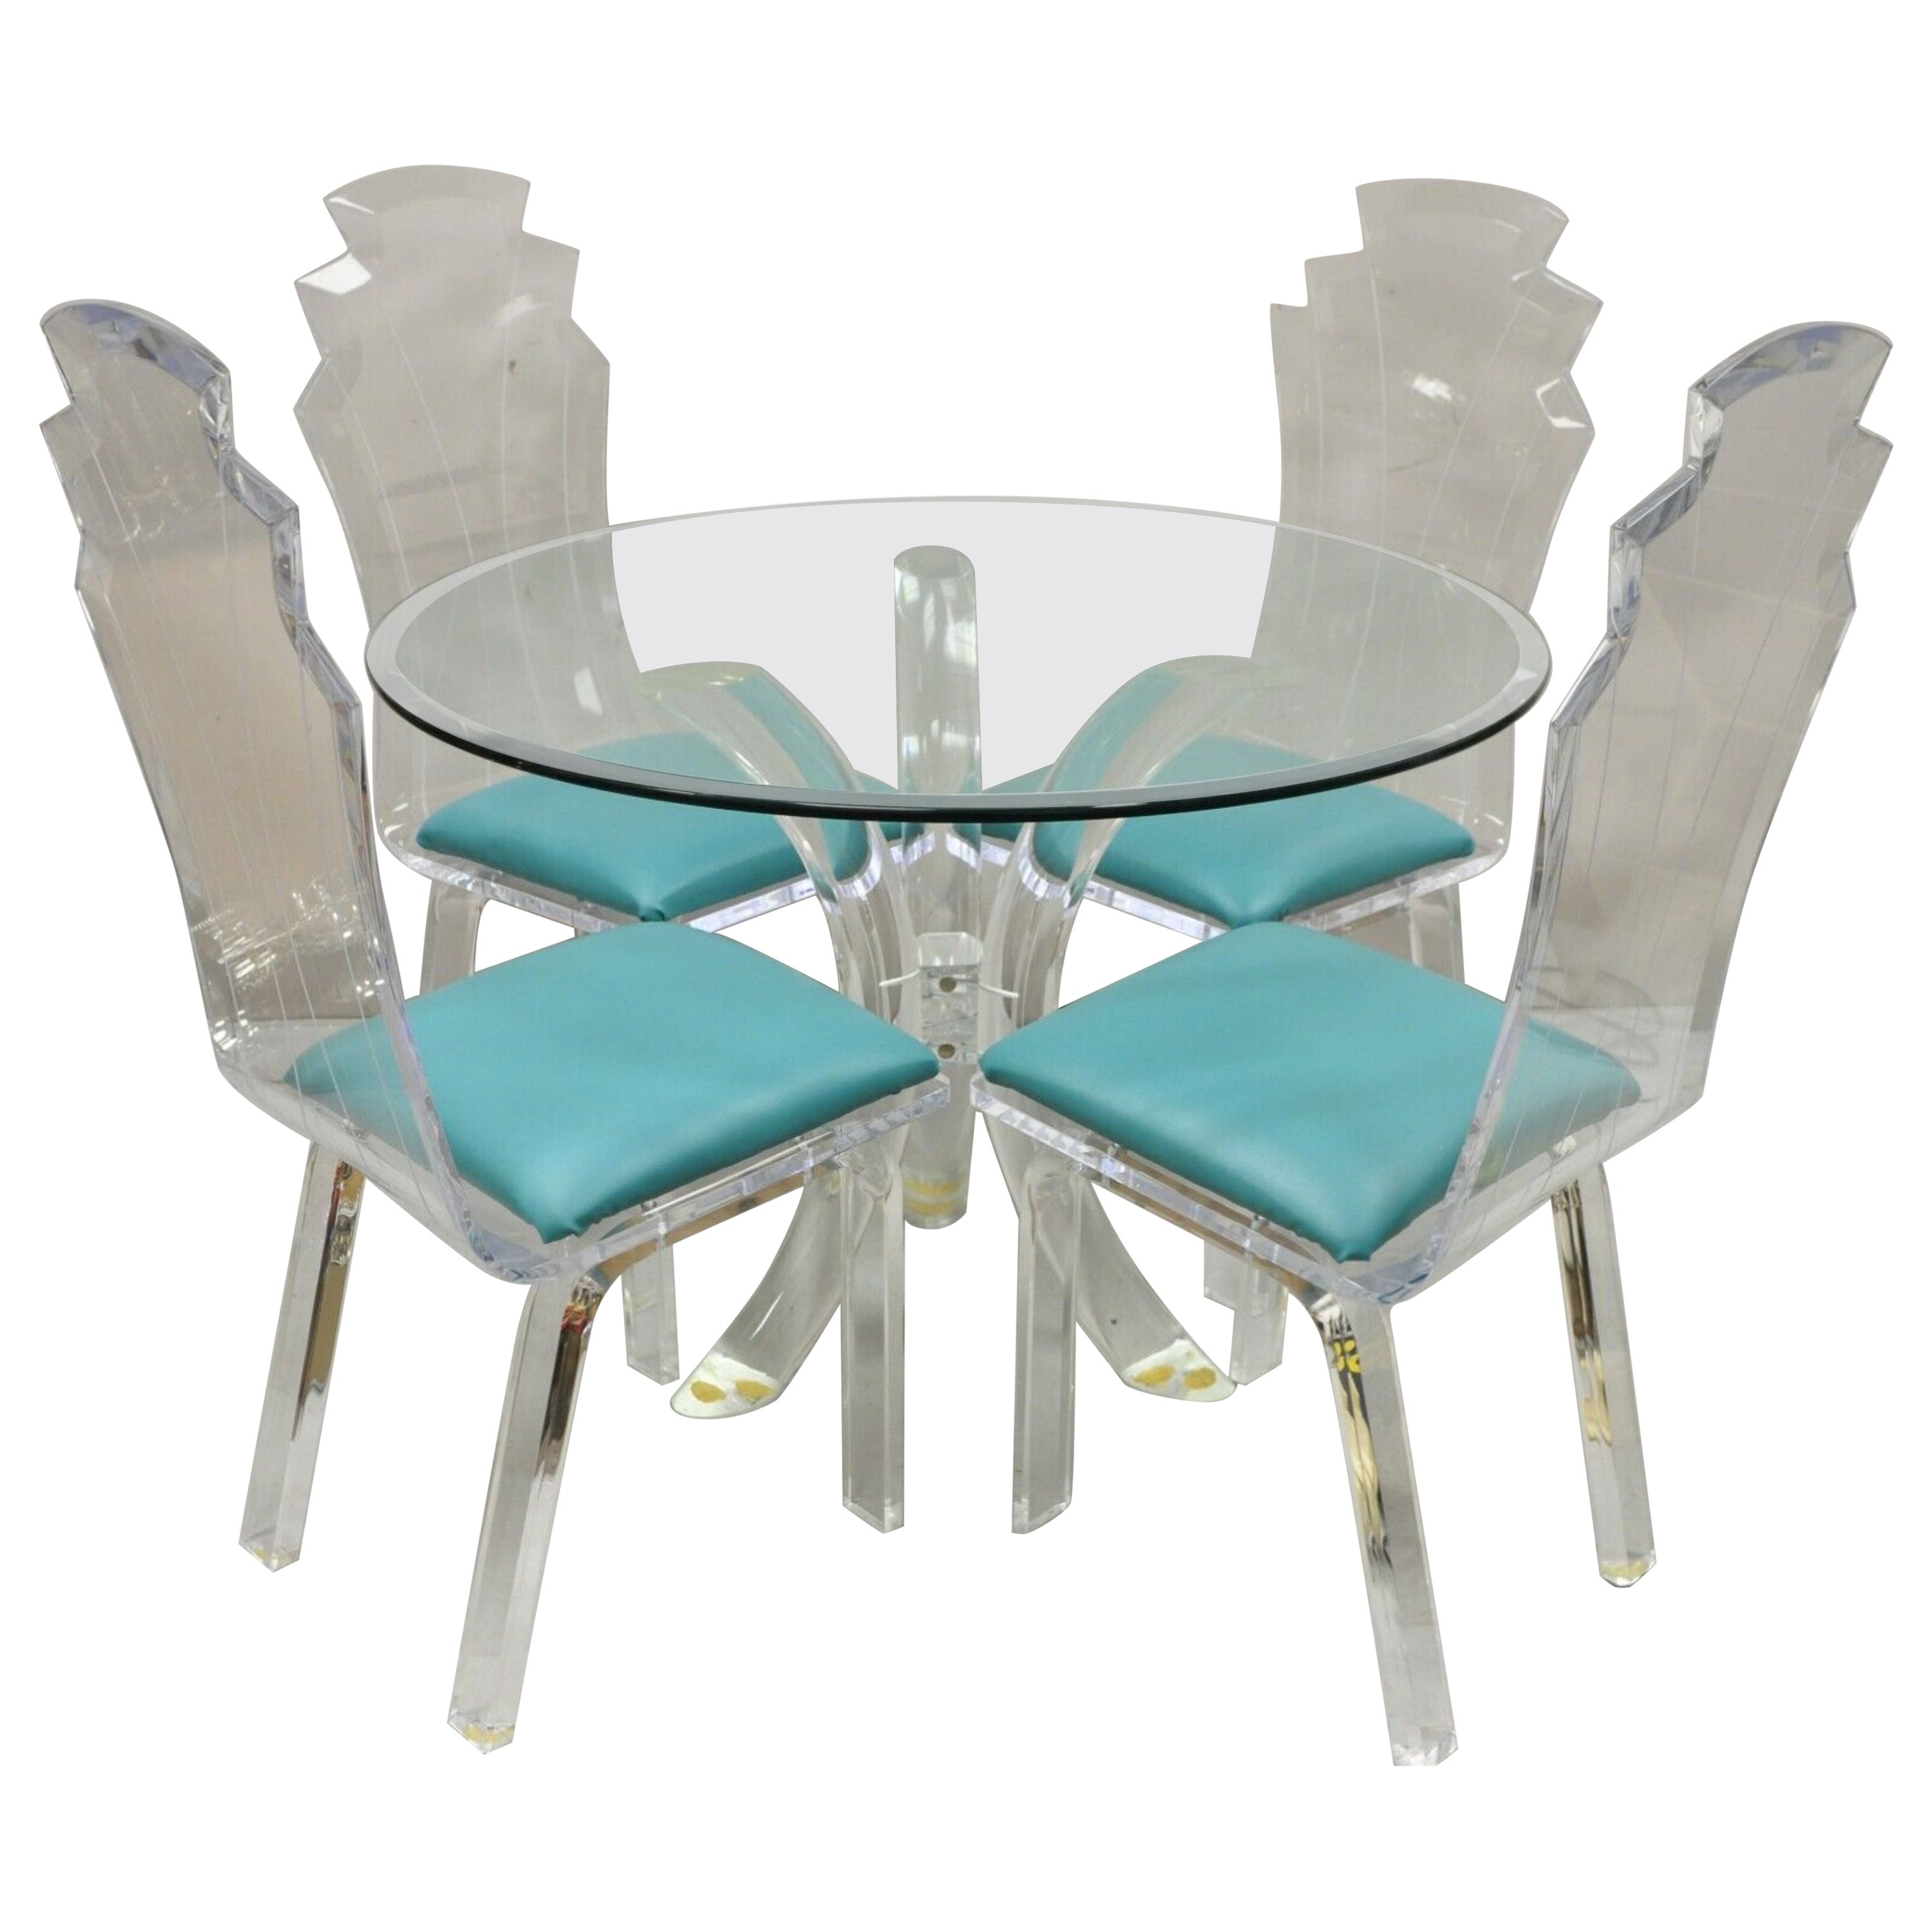 Vintage Lucite Acrylic Mid Century Sculptural Dining Table & 4 Chairs - 5 Pc Set For Sale